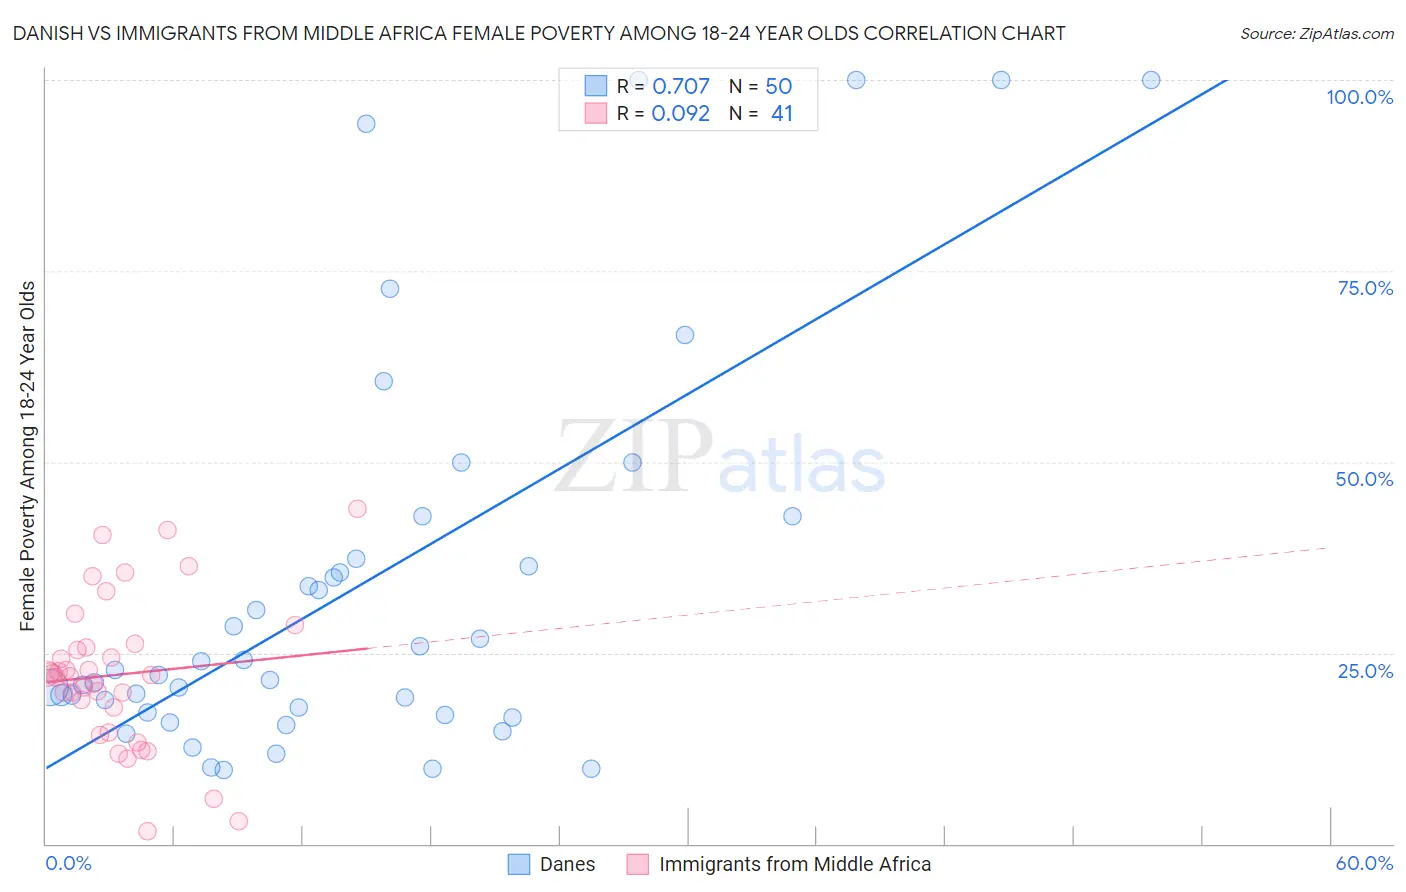 Danish vs Immigrants from Middle Africa Female Poverty Among 18-24 Year Olds